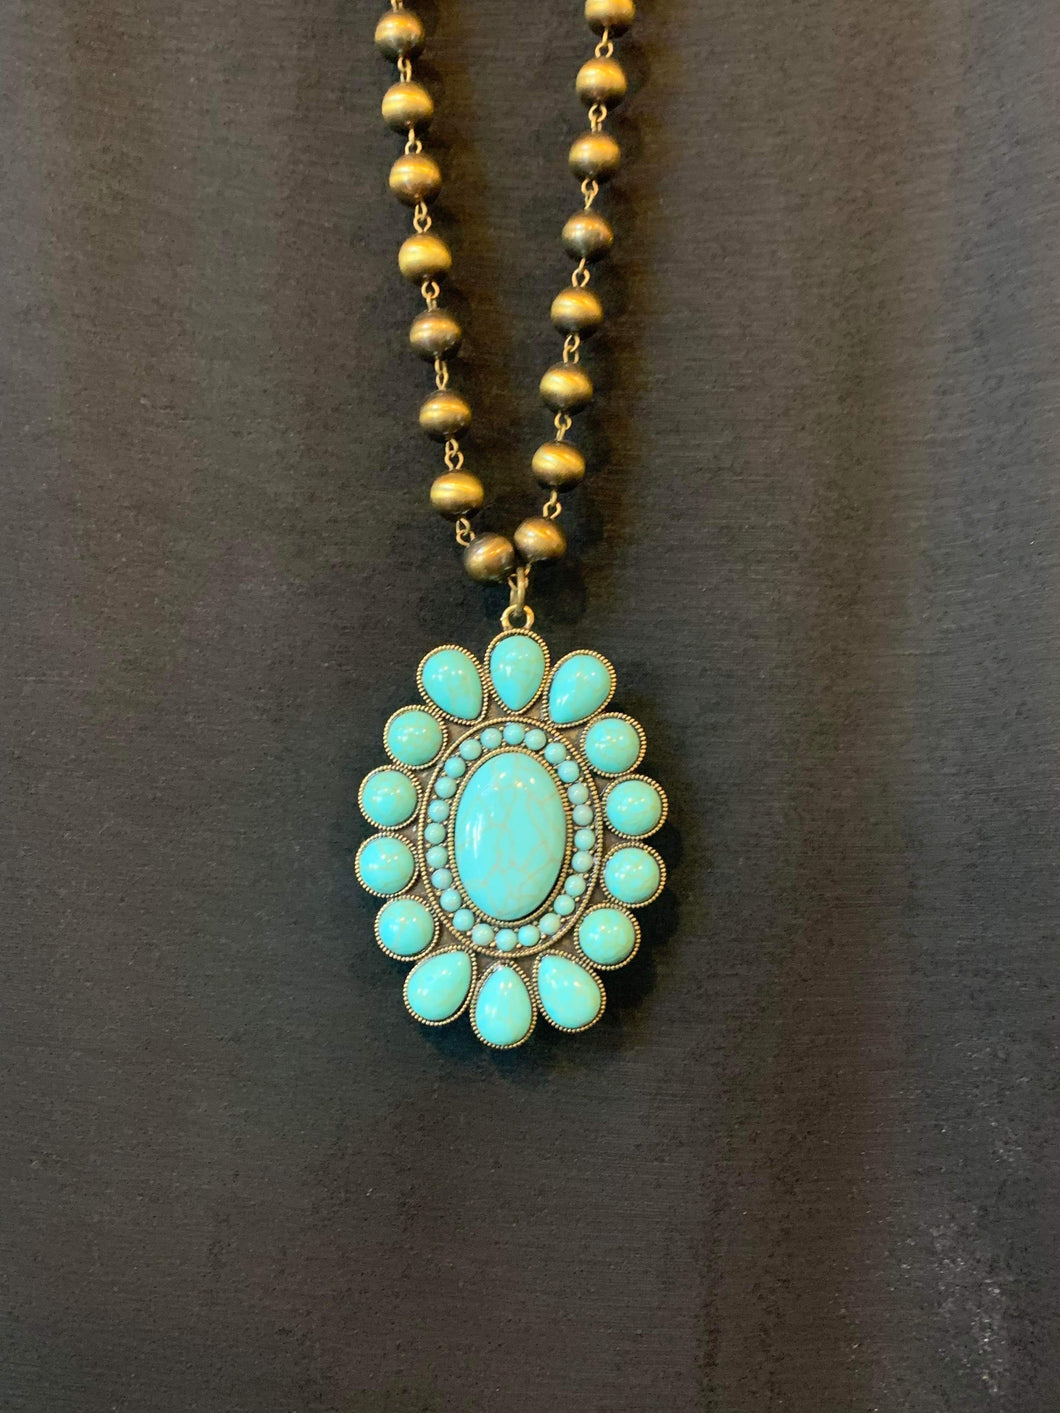 Turquoise Day Blossom Necklace